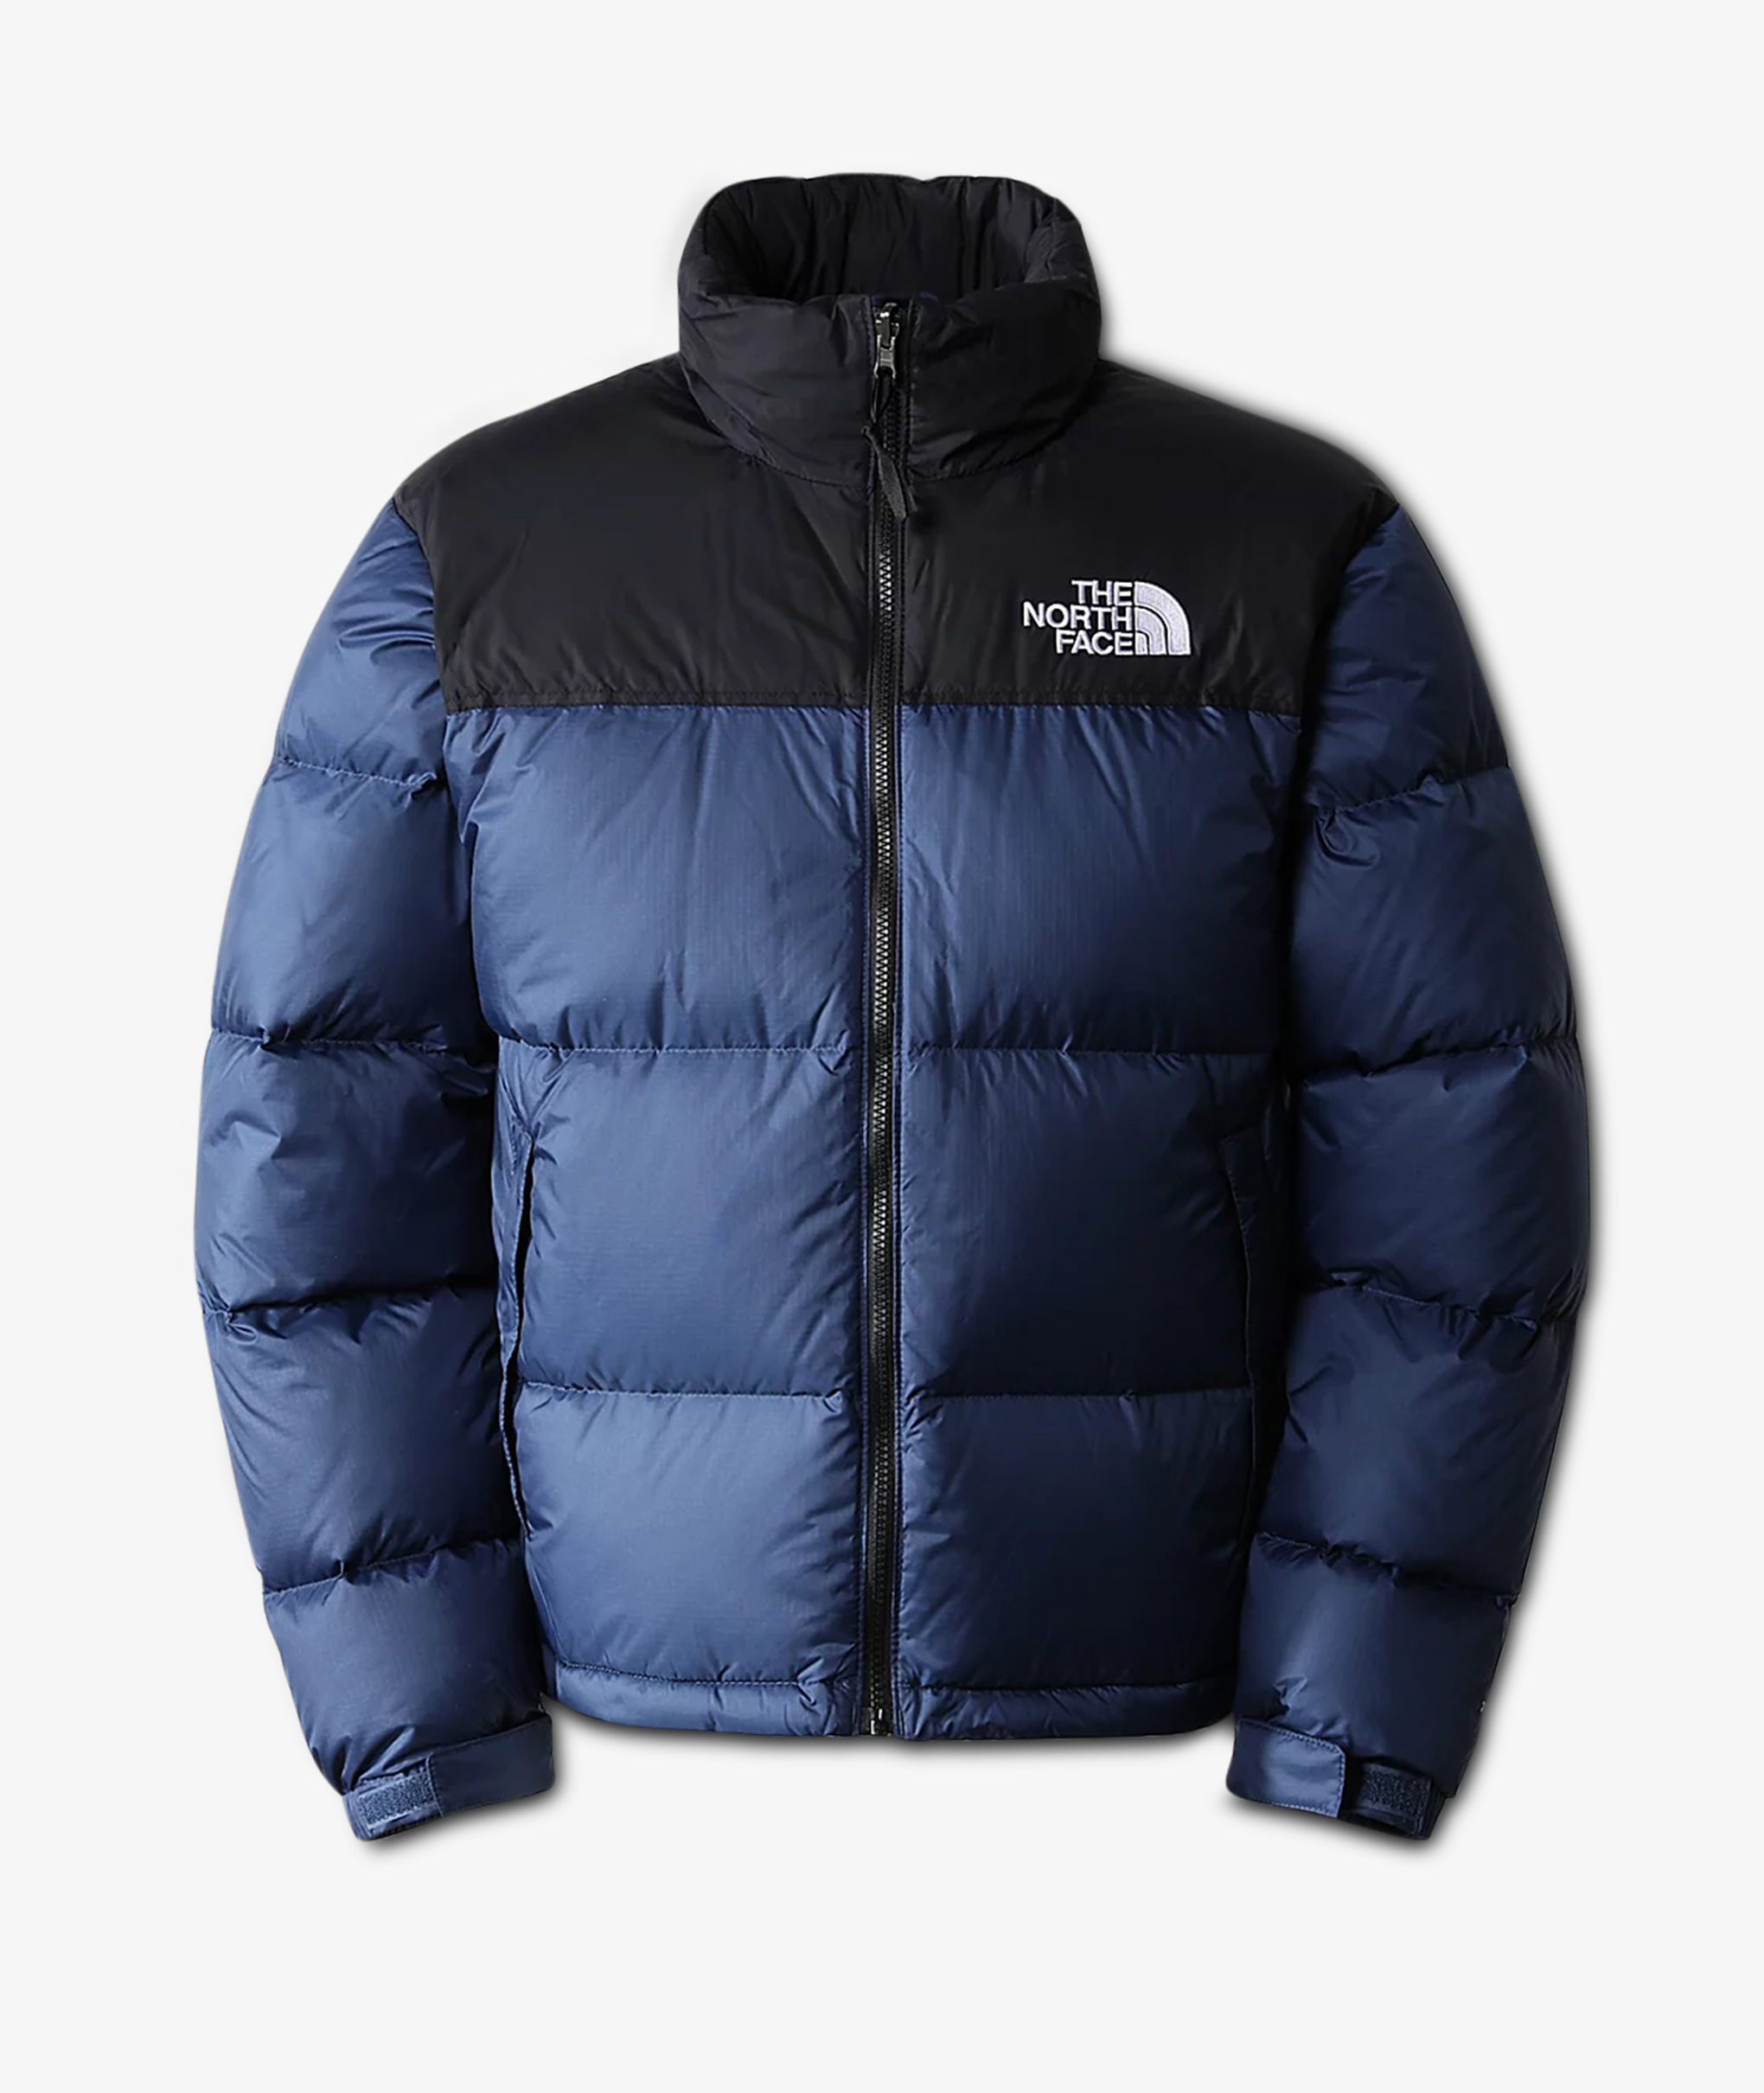 Norse Store | Shipping Worldwide - The North Face M 96 RETRO 